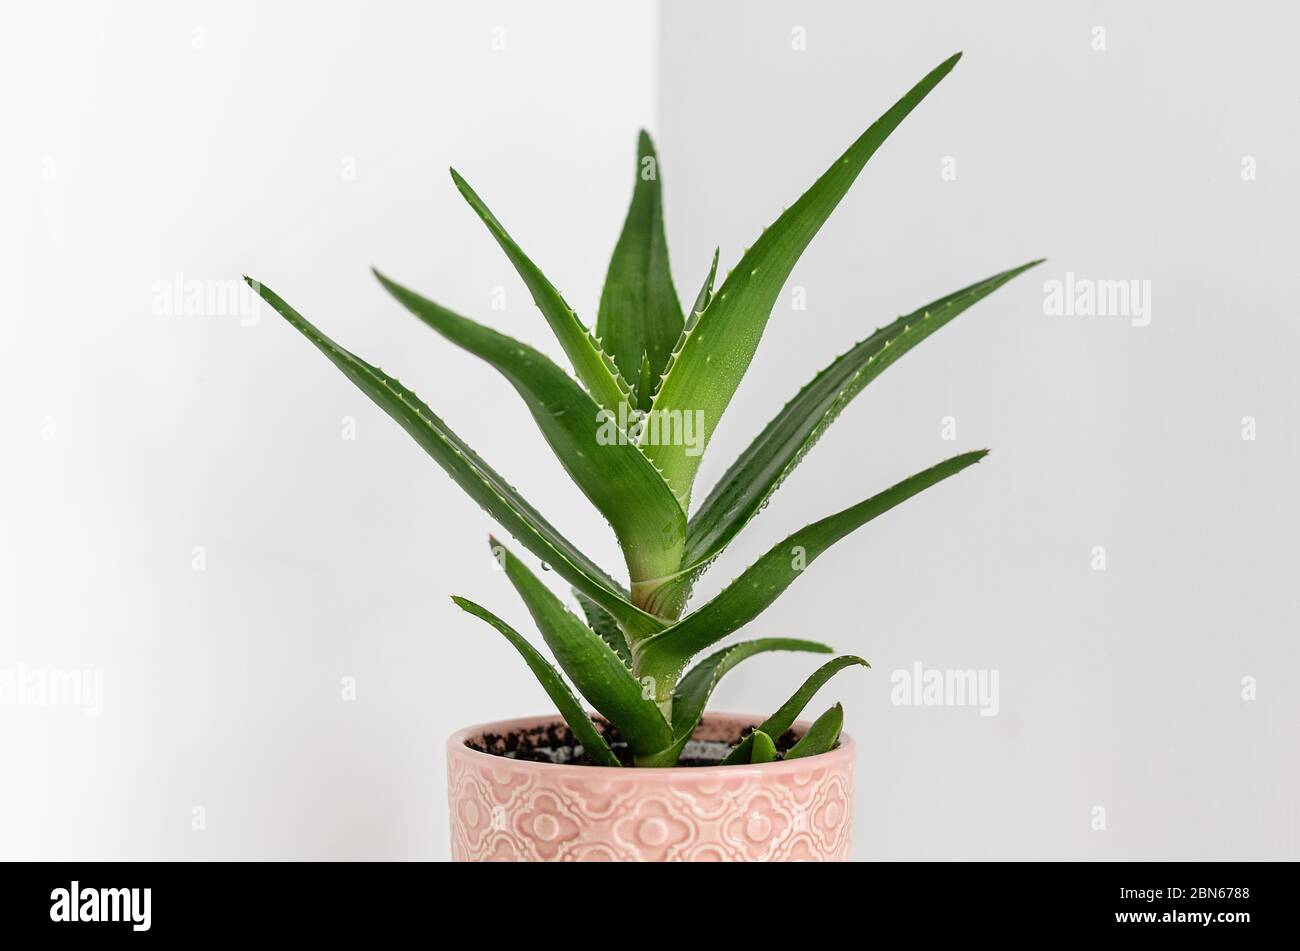 Aloe plant in a pink ceramic flower pot on the light background. Planting and care of indoor plants and flowers. Close up. Stock Photo